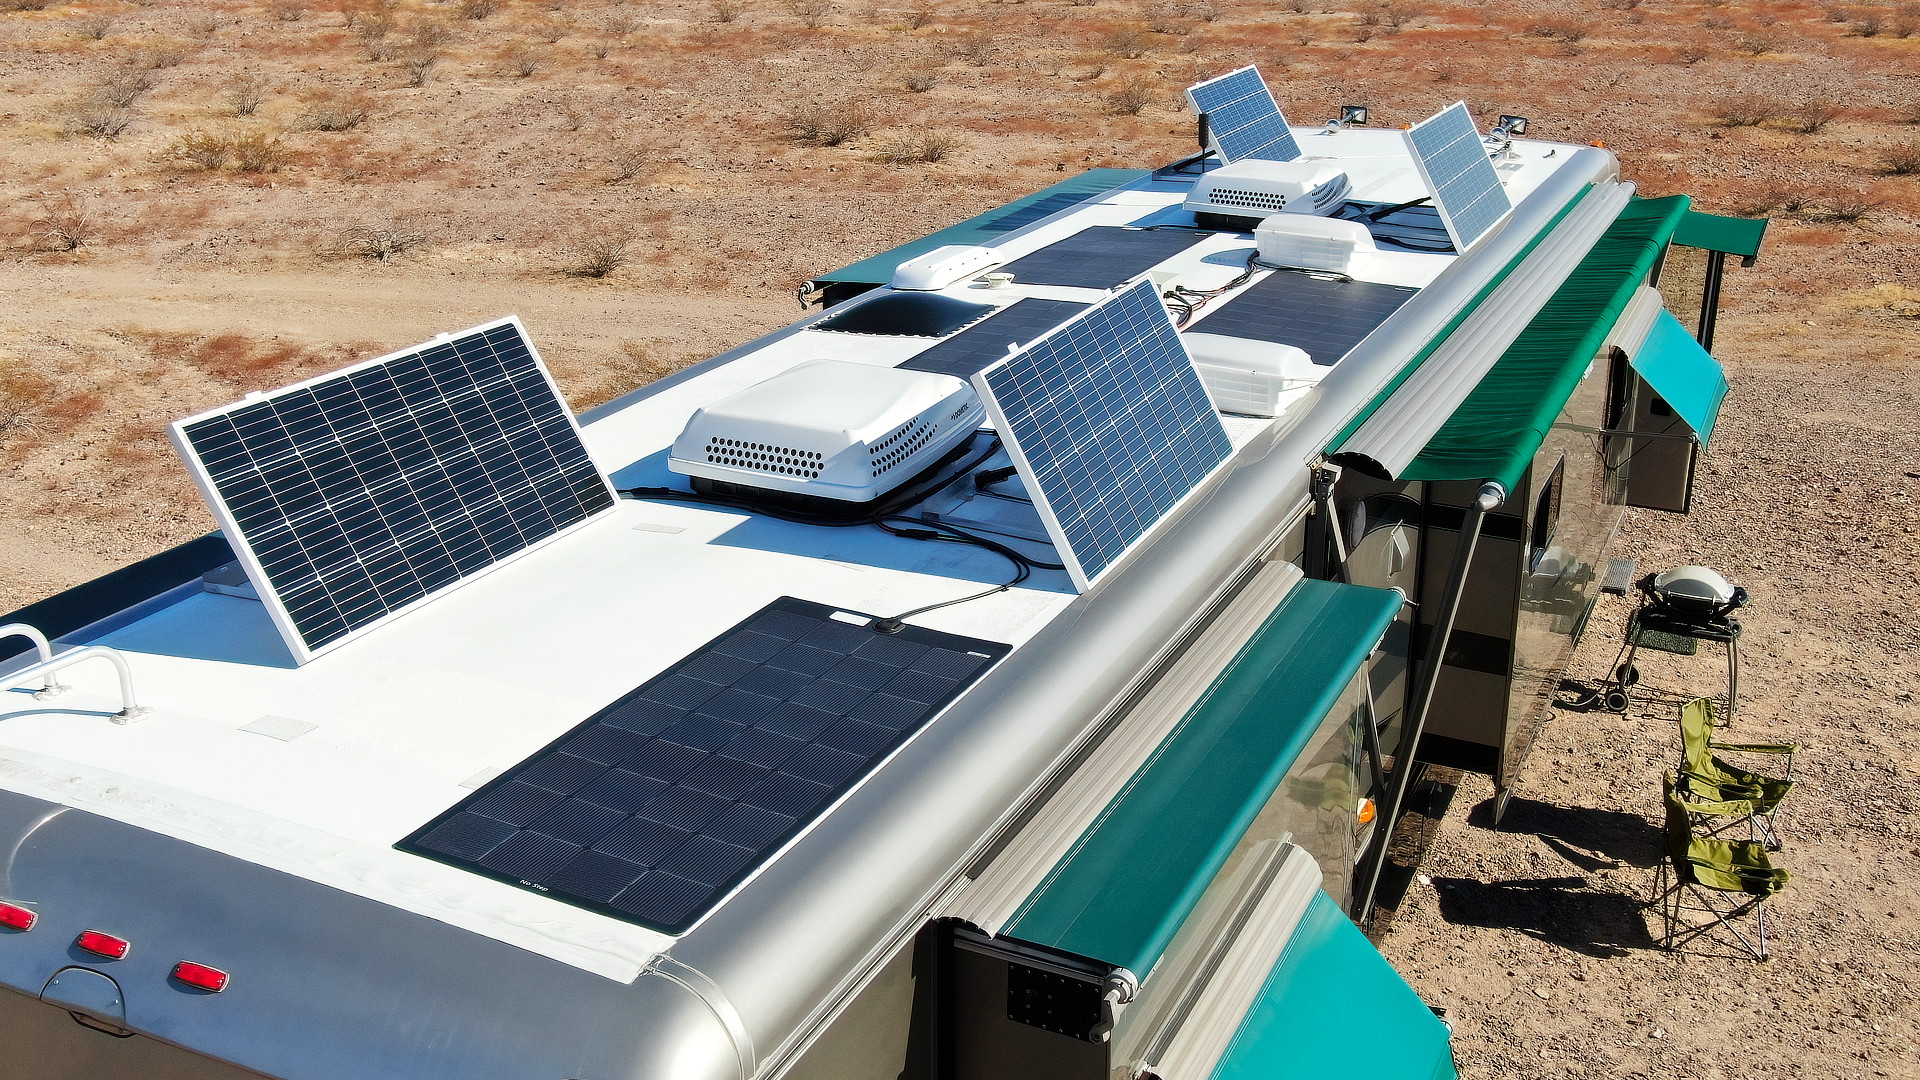 Dry camping with our solar system providing power from the sun.